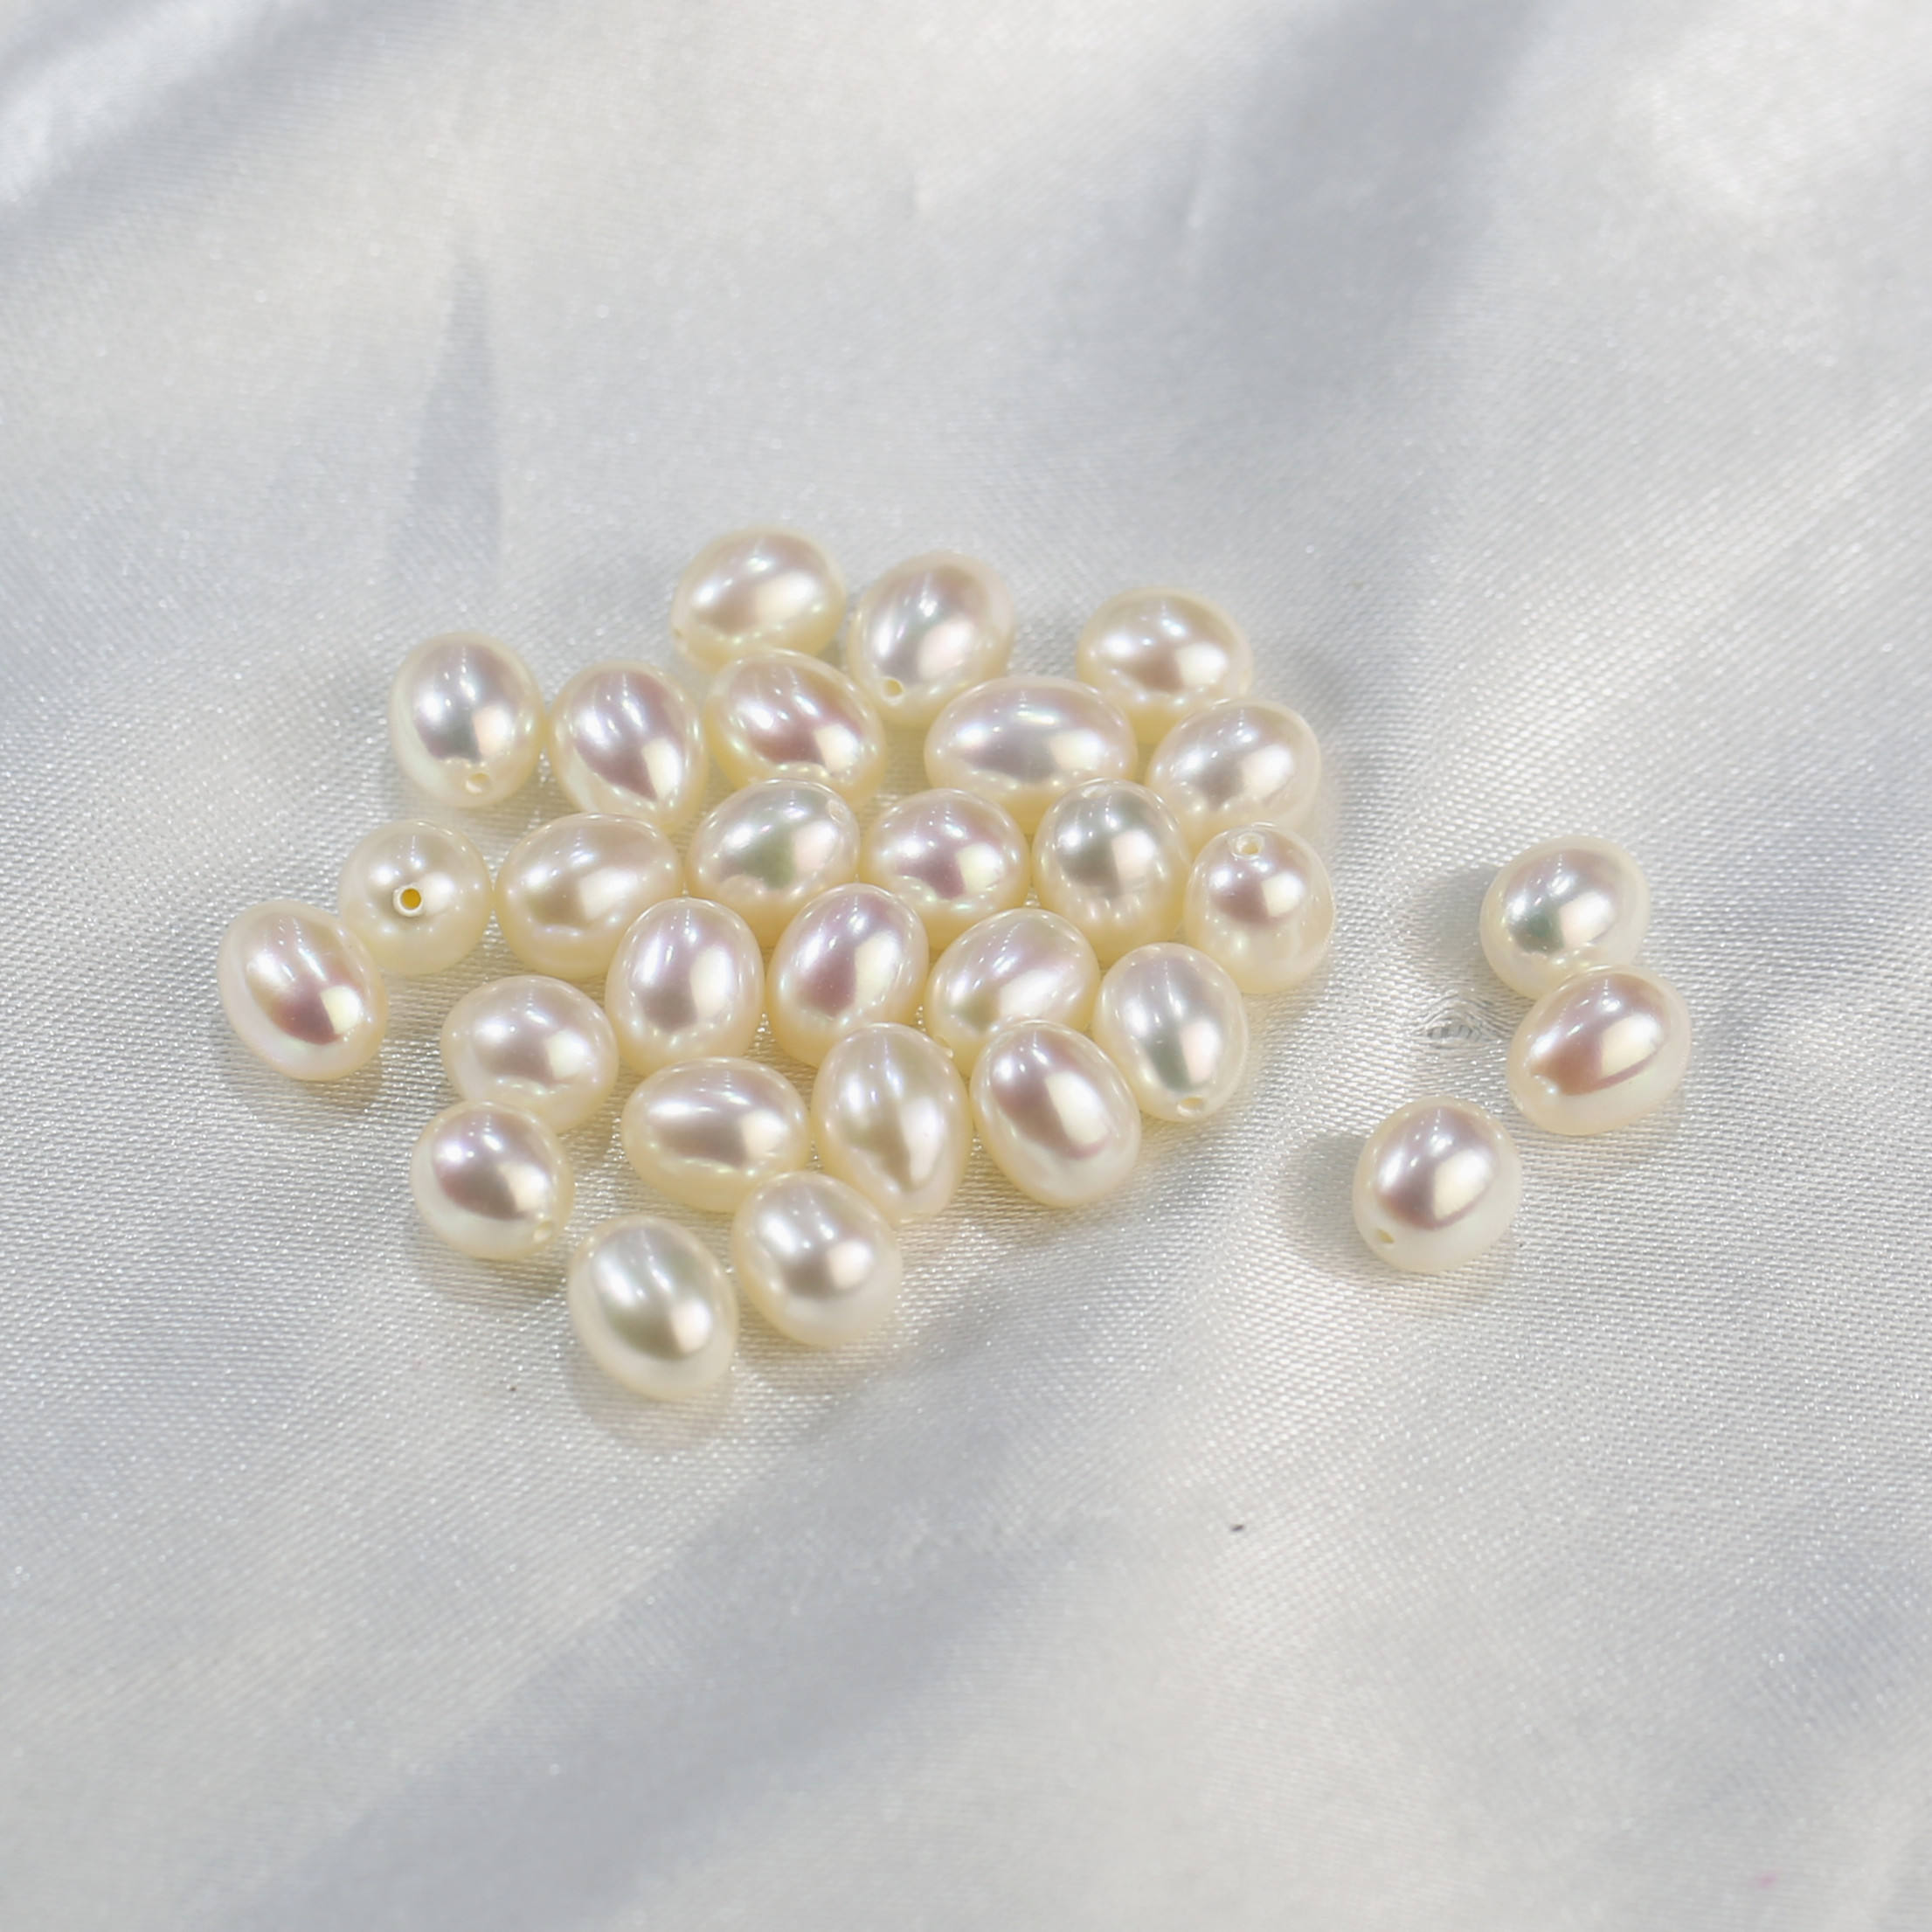 7-7.5mm drop loose pearl real natural freshwater pearls price no hole or one hole